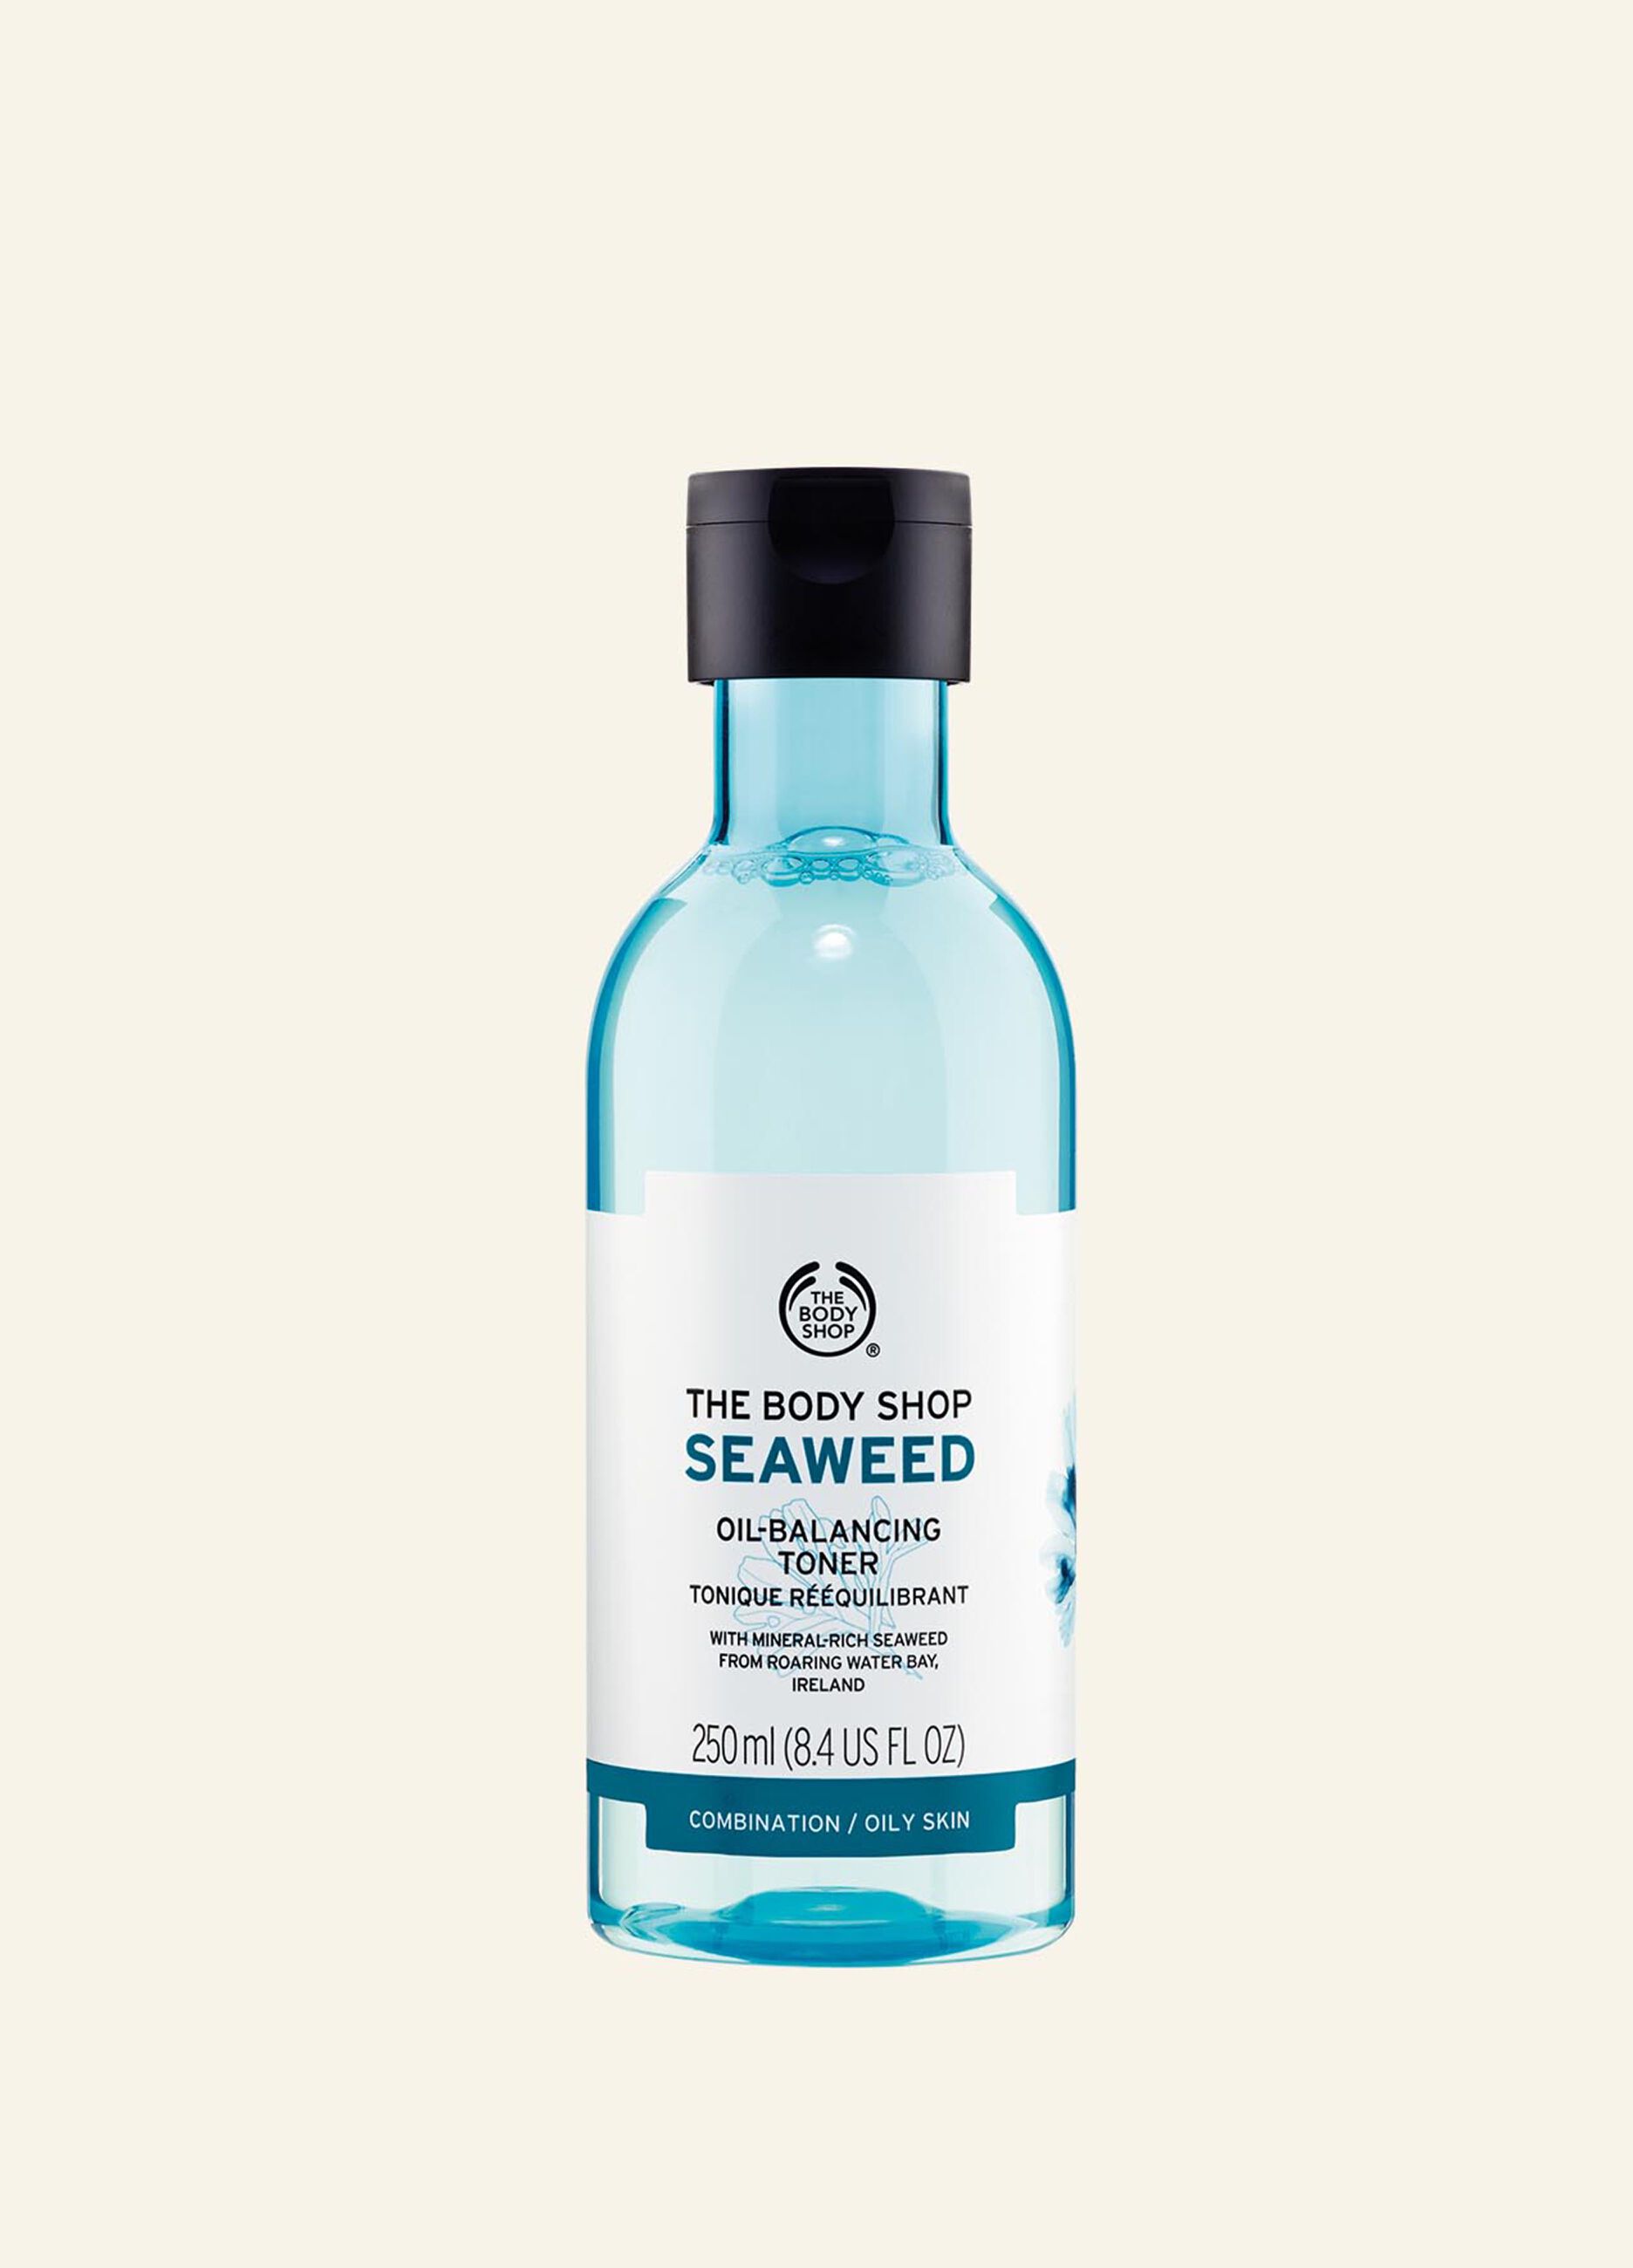 Tonico equilibrante alle alghe marine 250ml The Body Shop